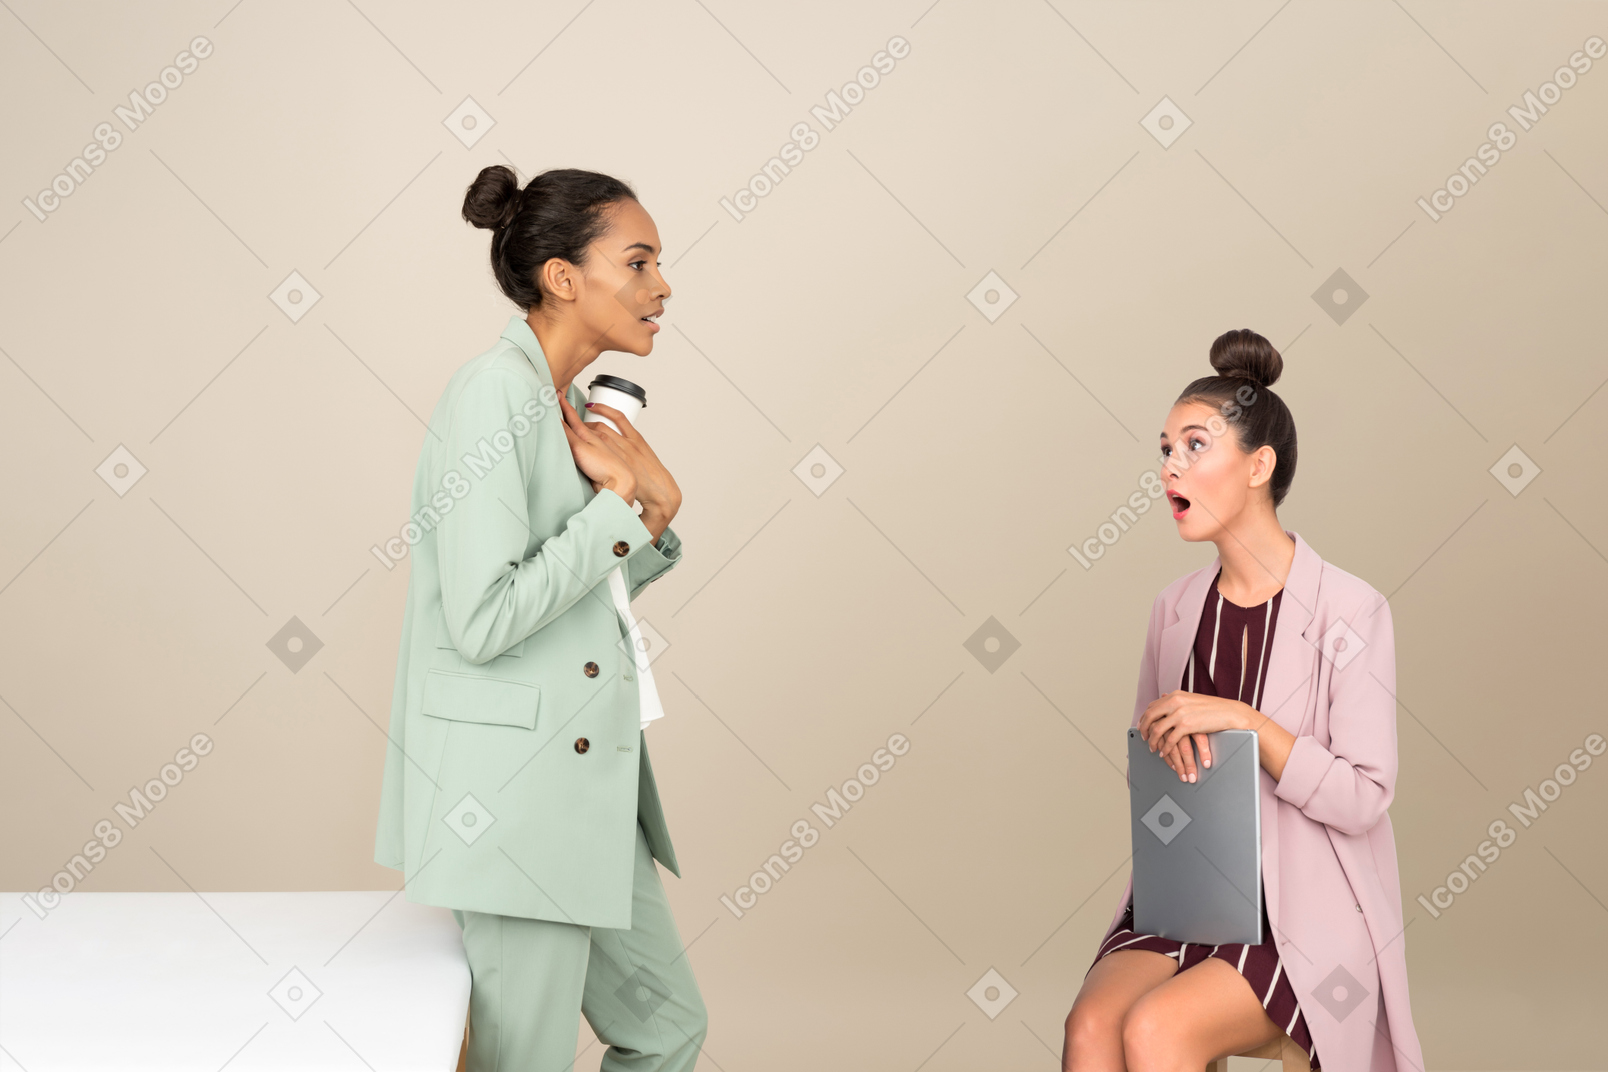 Amazed young woman looking at her female colleague